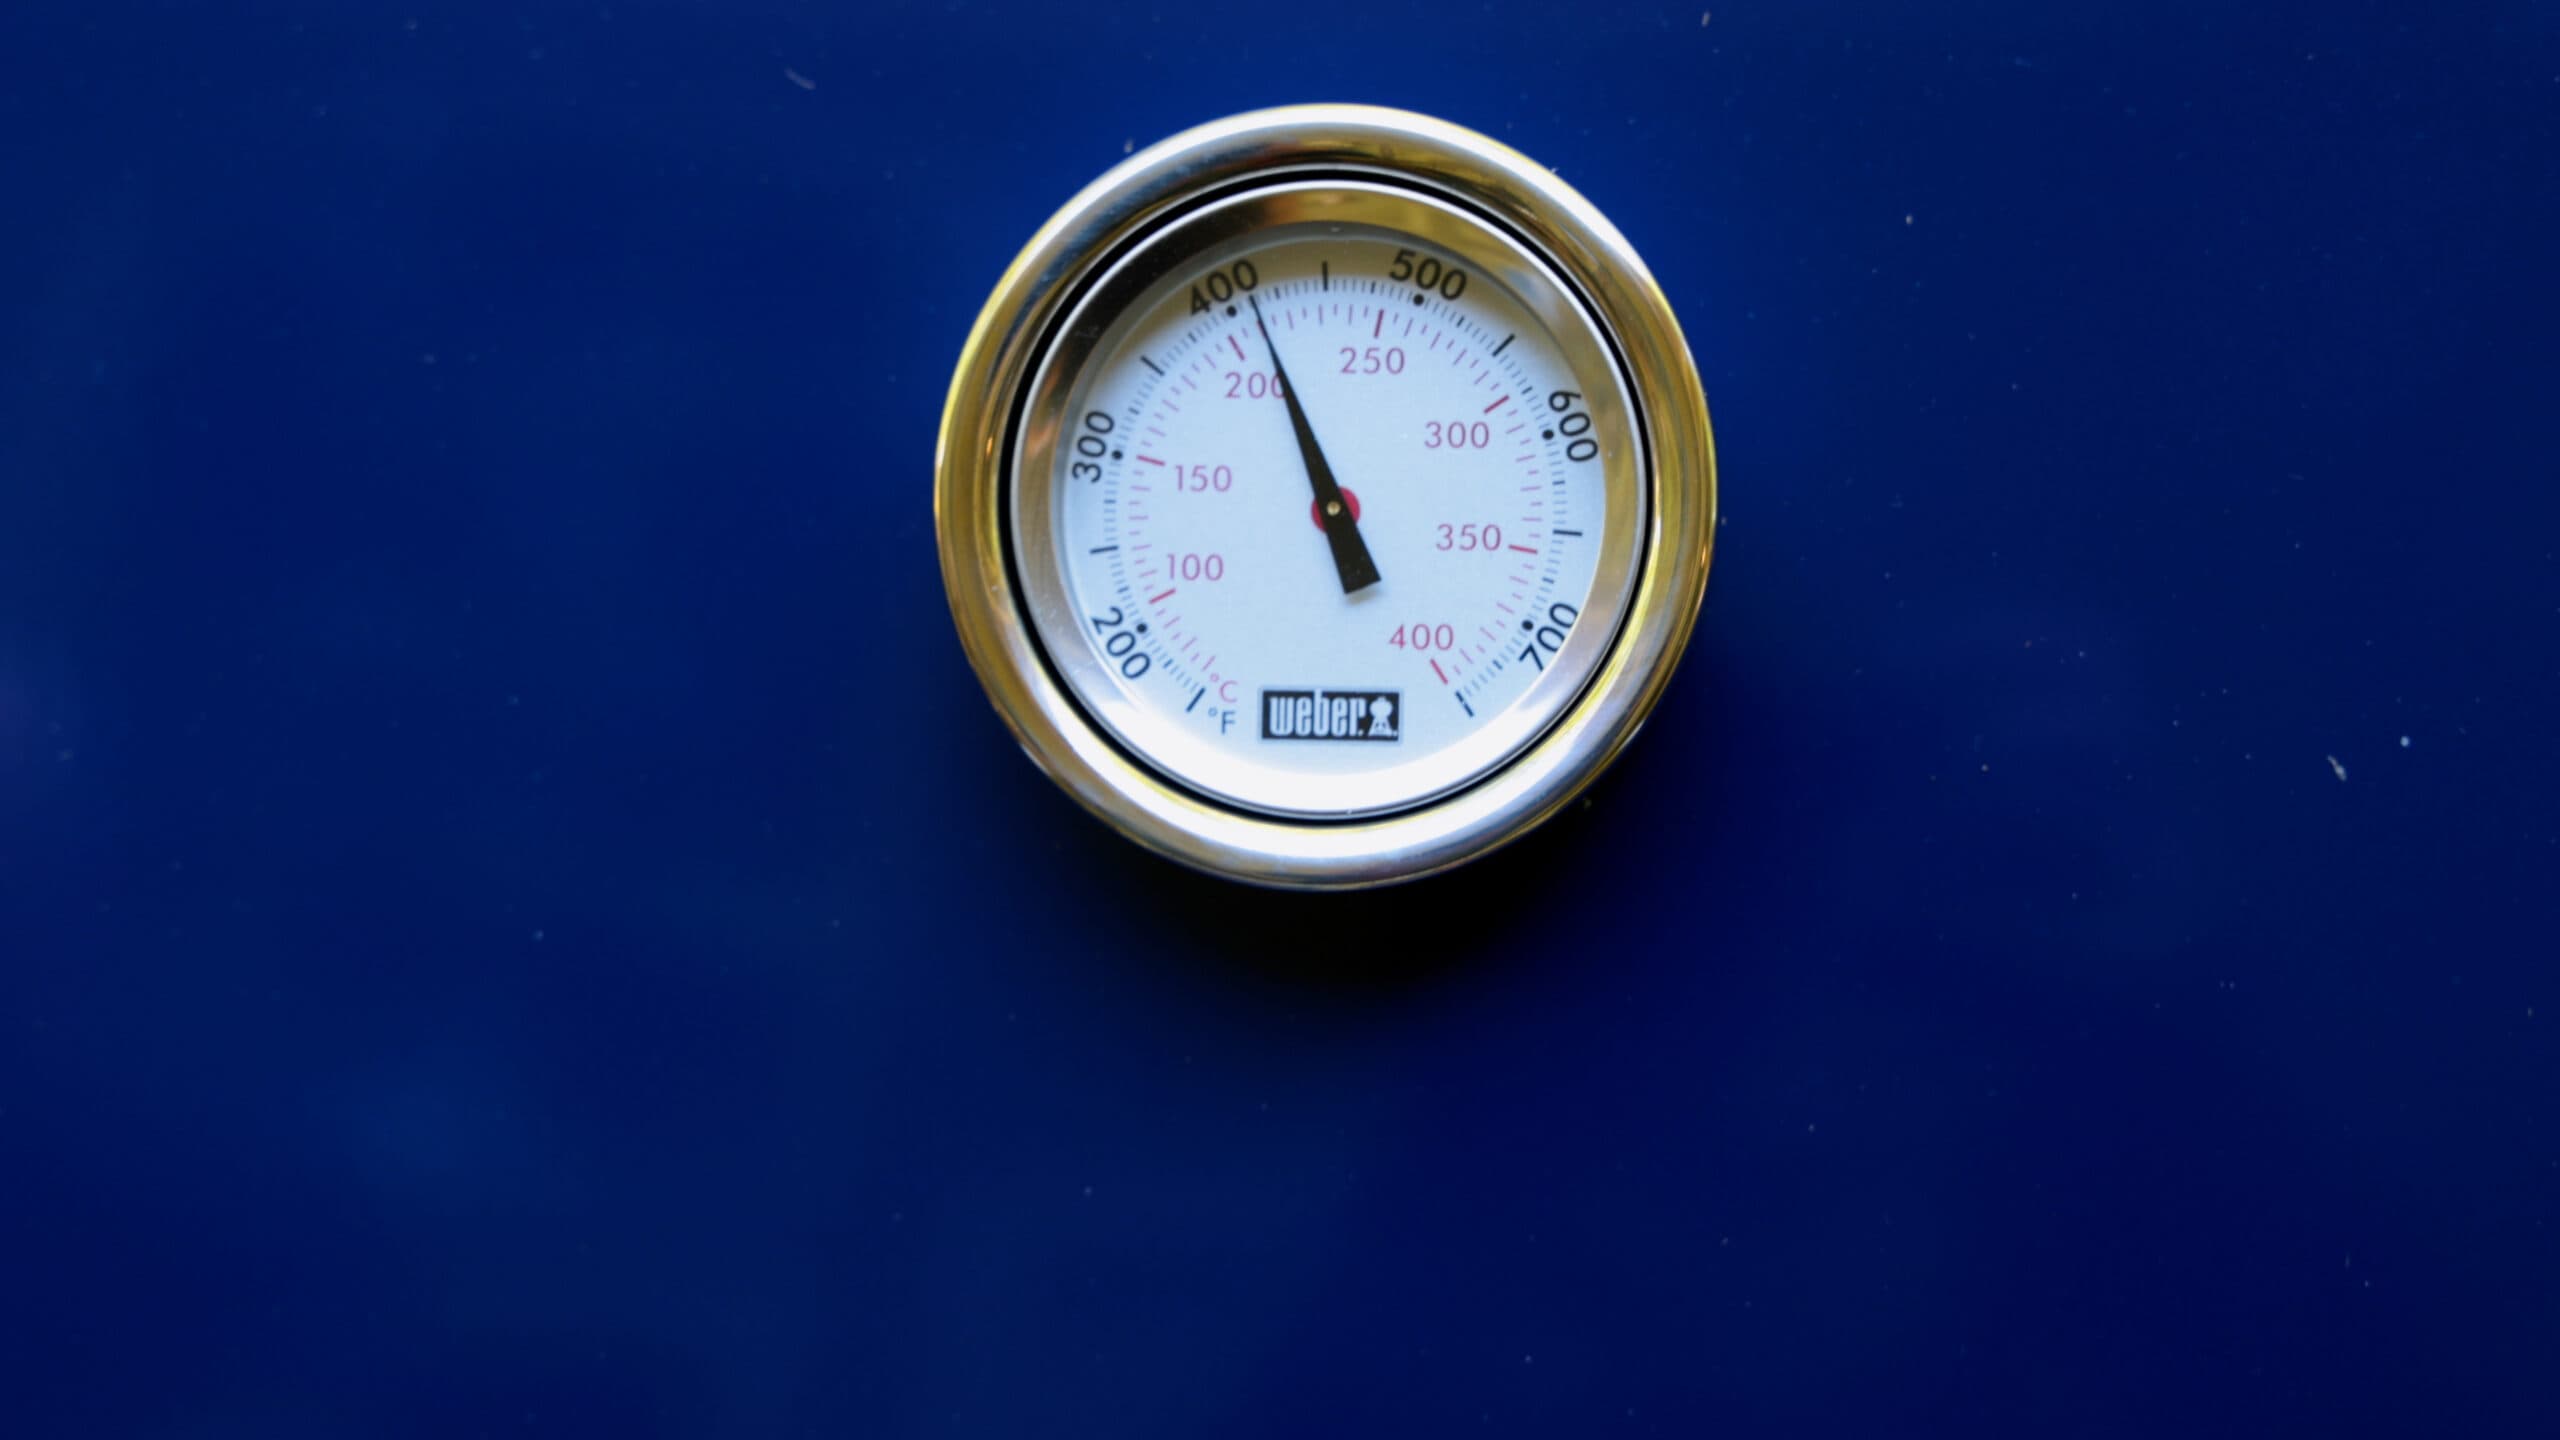 Blue grill with temperature showing 400 degrees Fahrenheit.